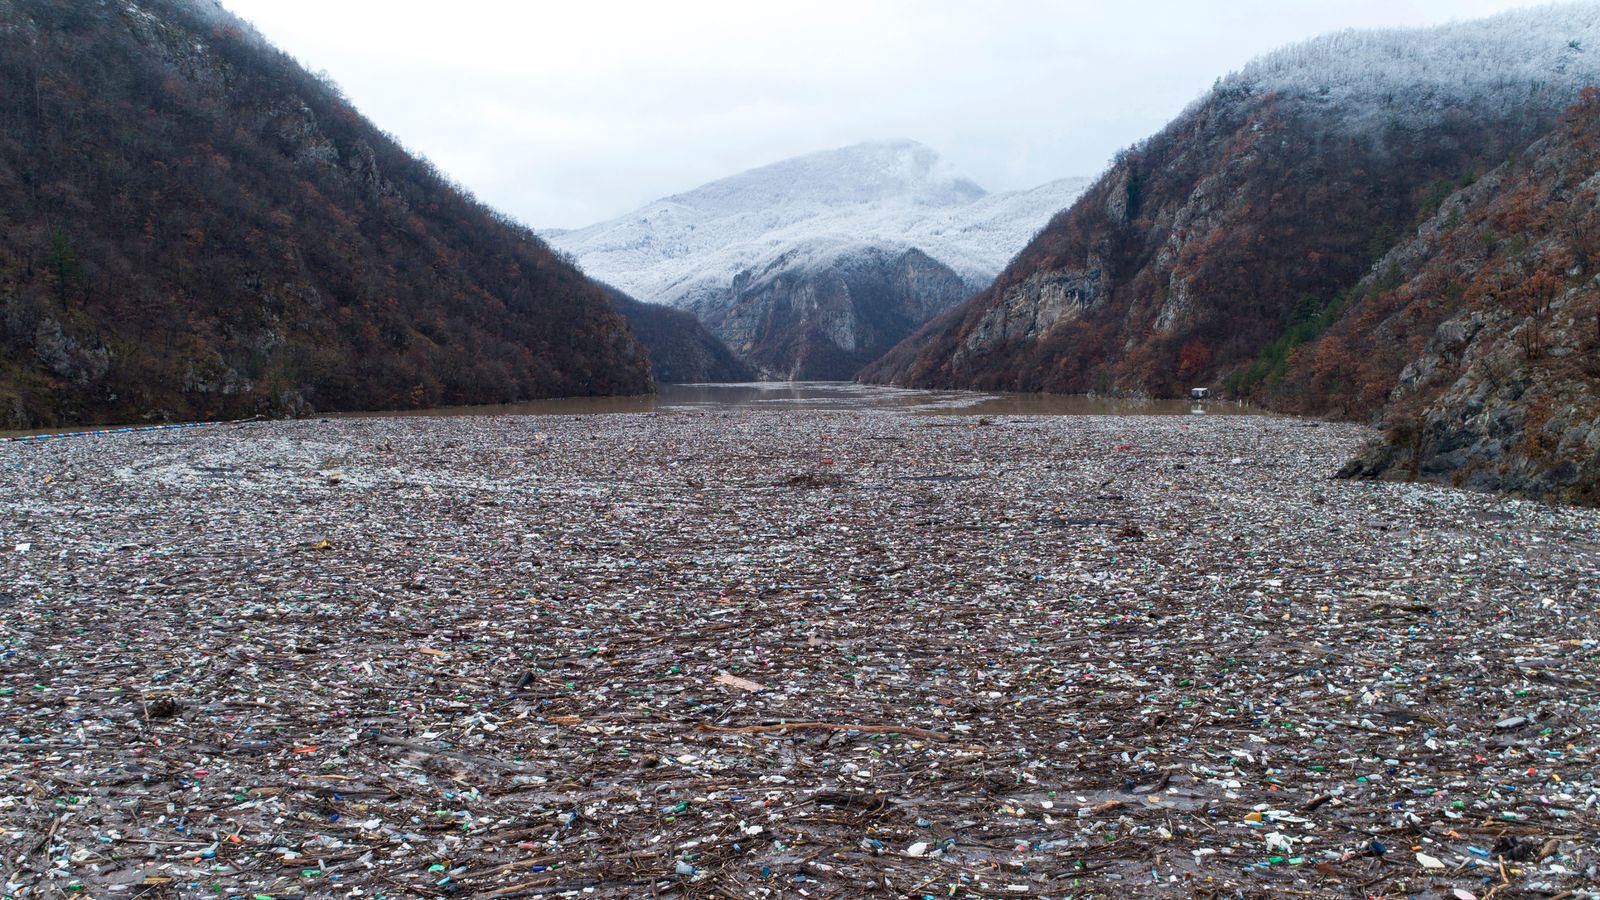 Balkan river known for its breath-taking scenery becomes floating rubbish dump